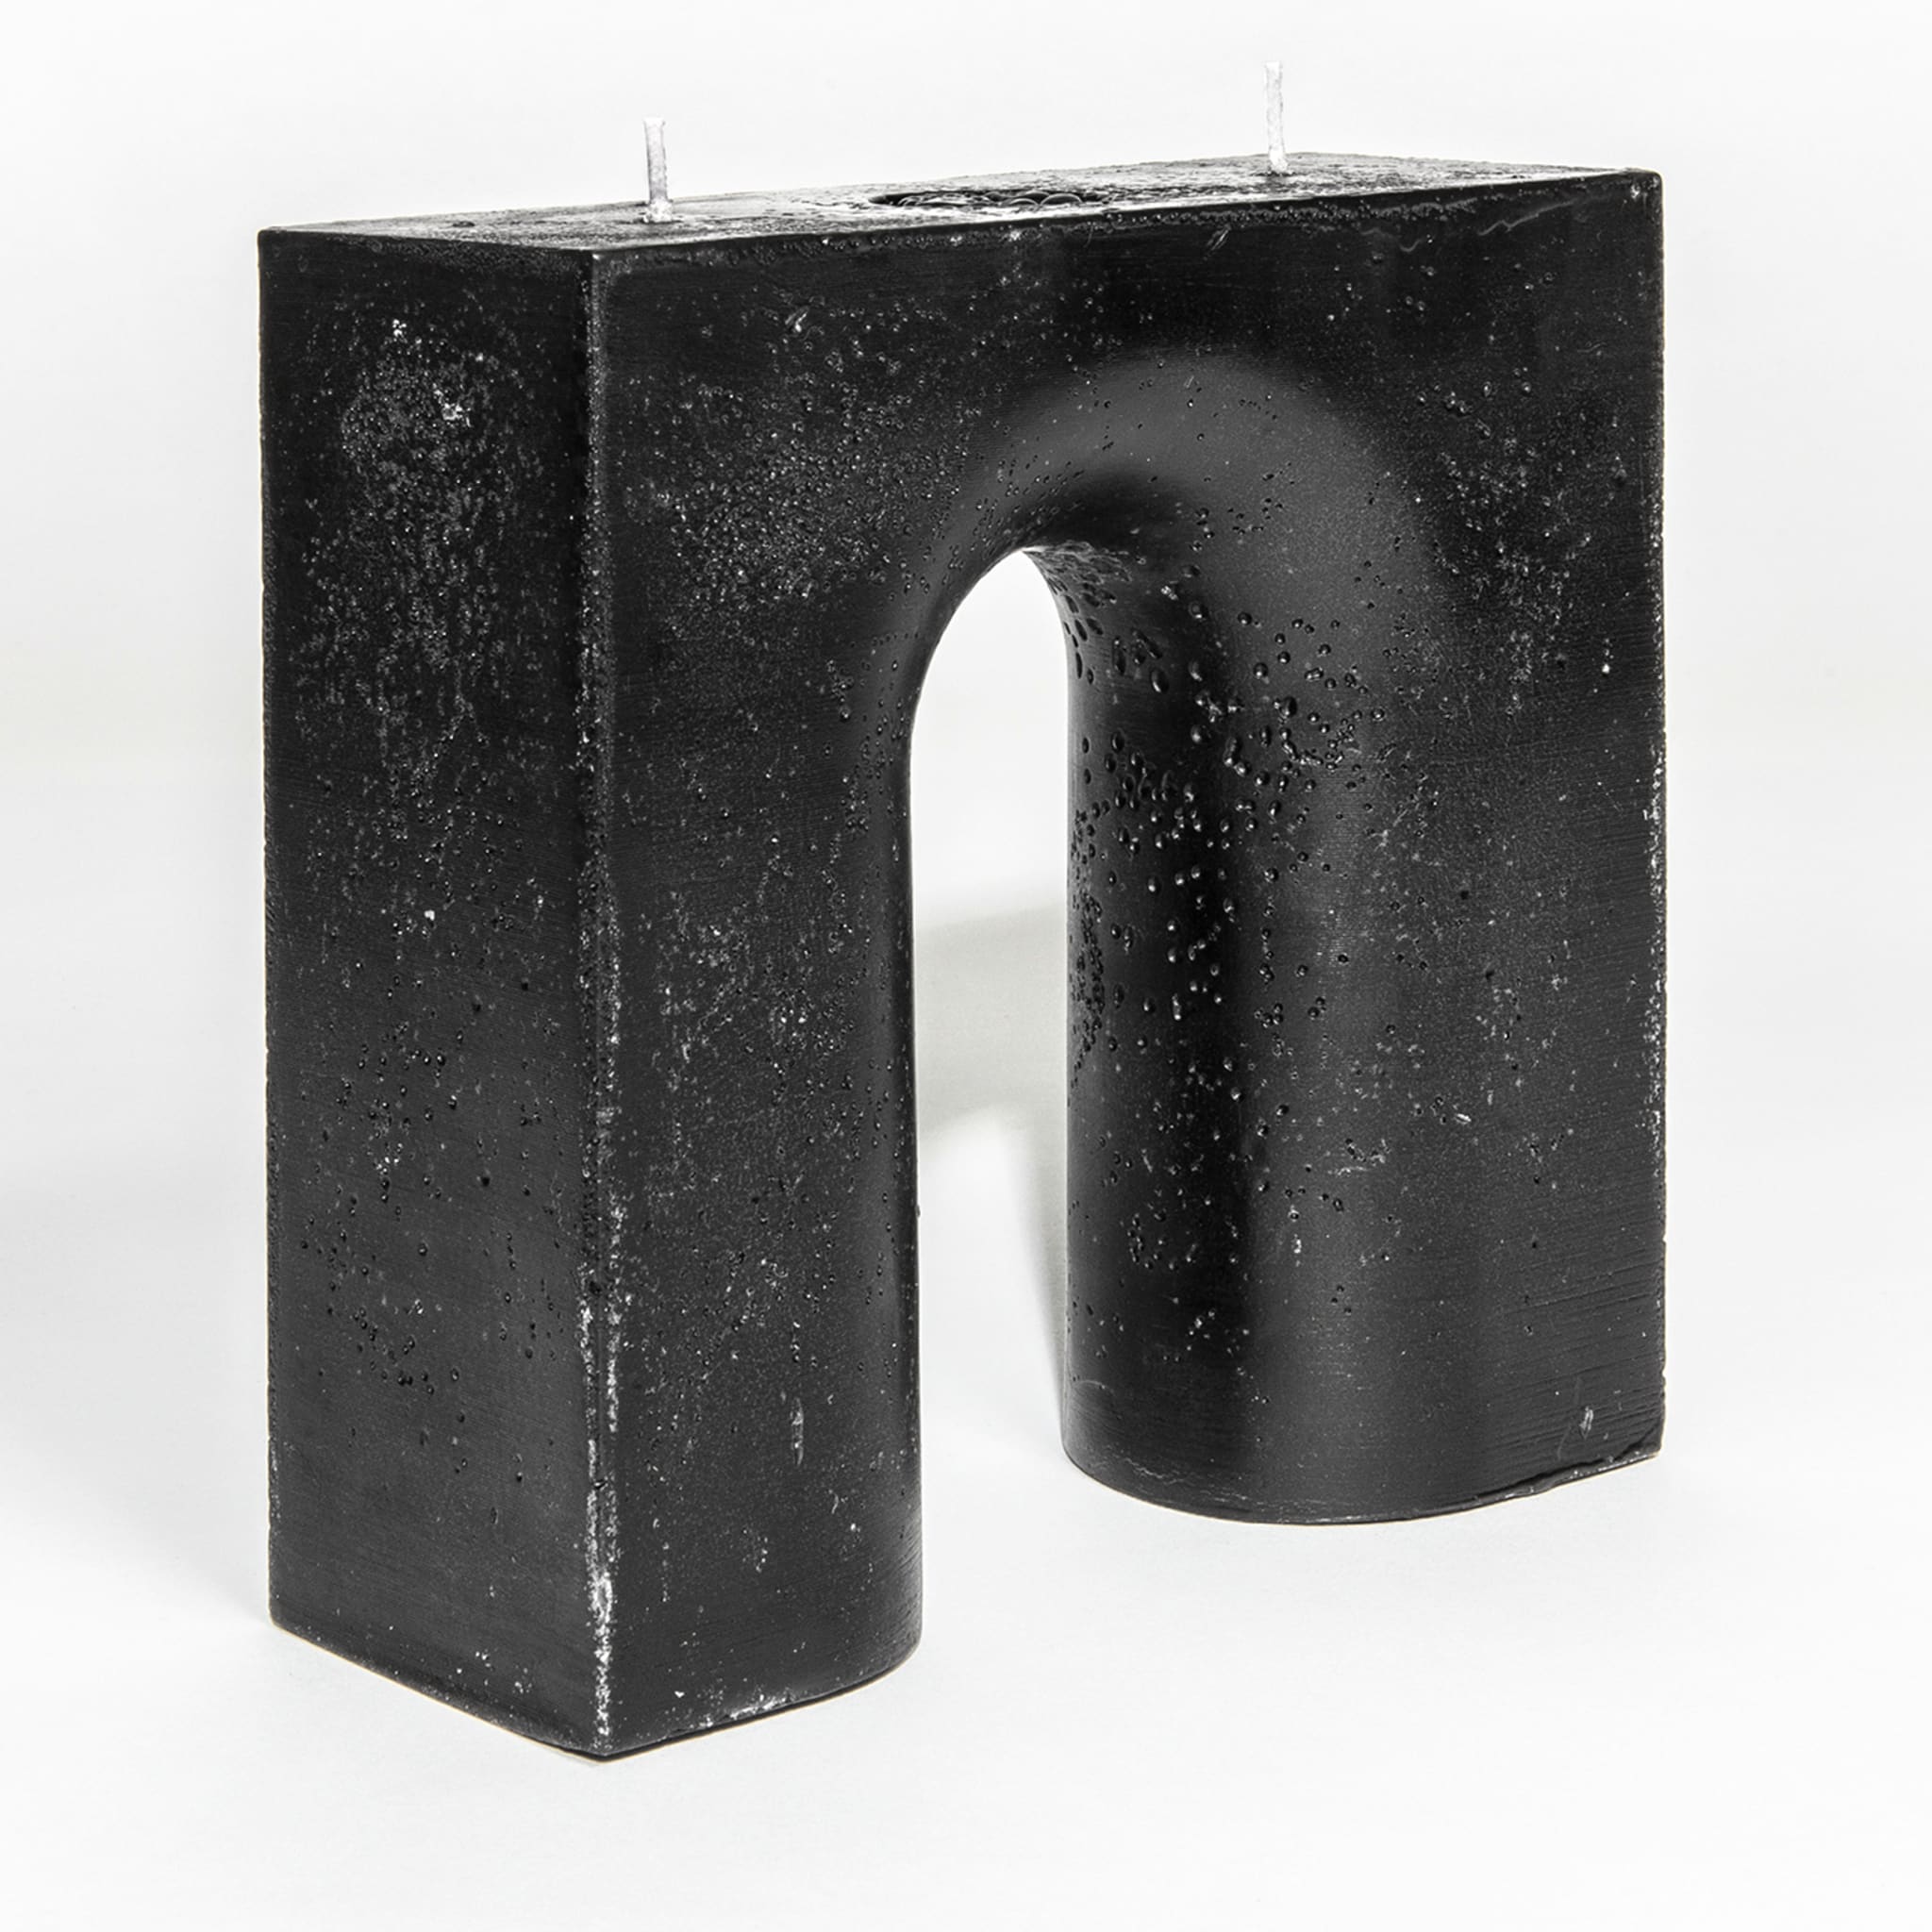 Trionfo Set of 2 Black and White Candles - Alternative view 1